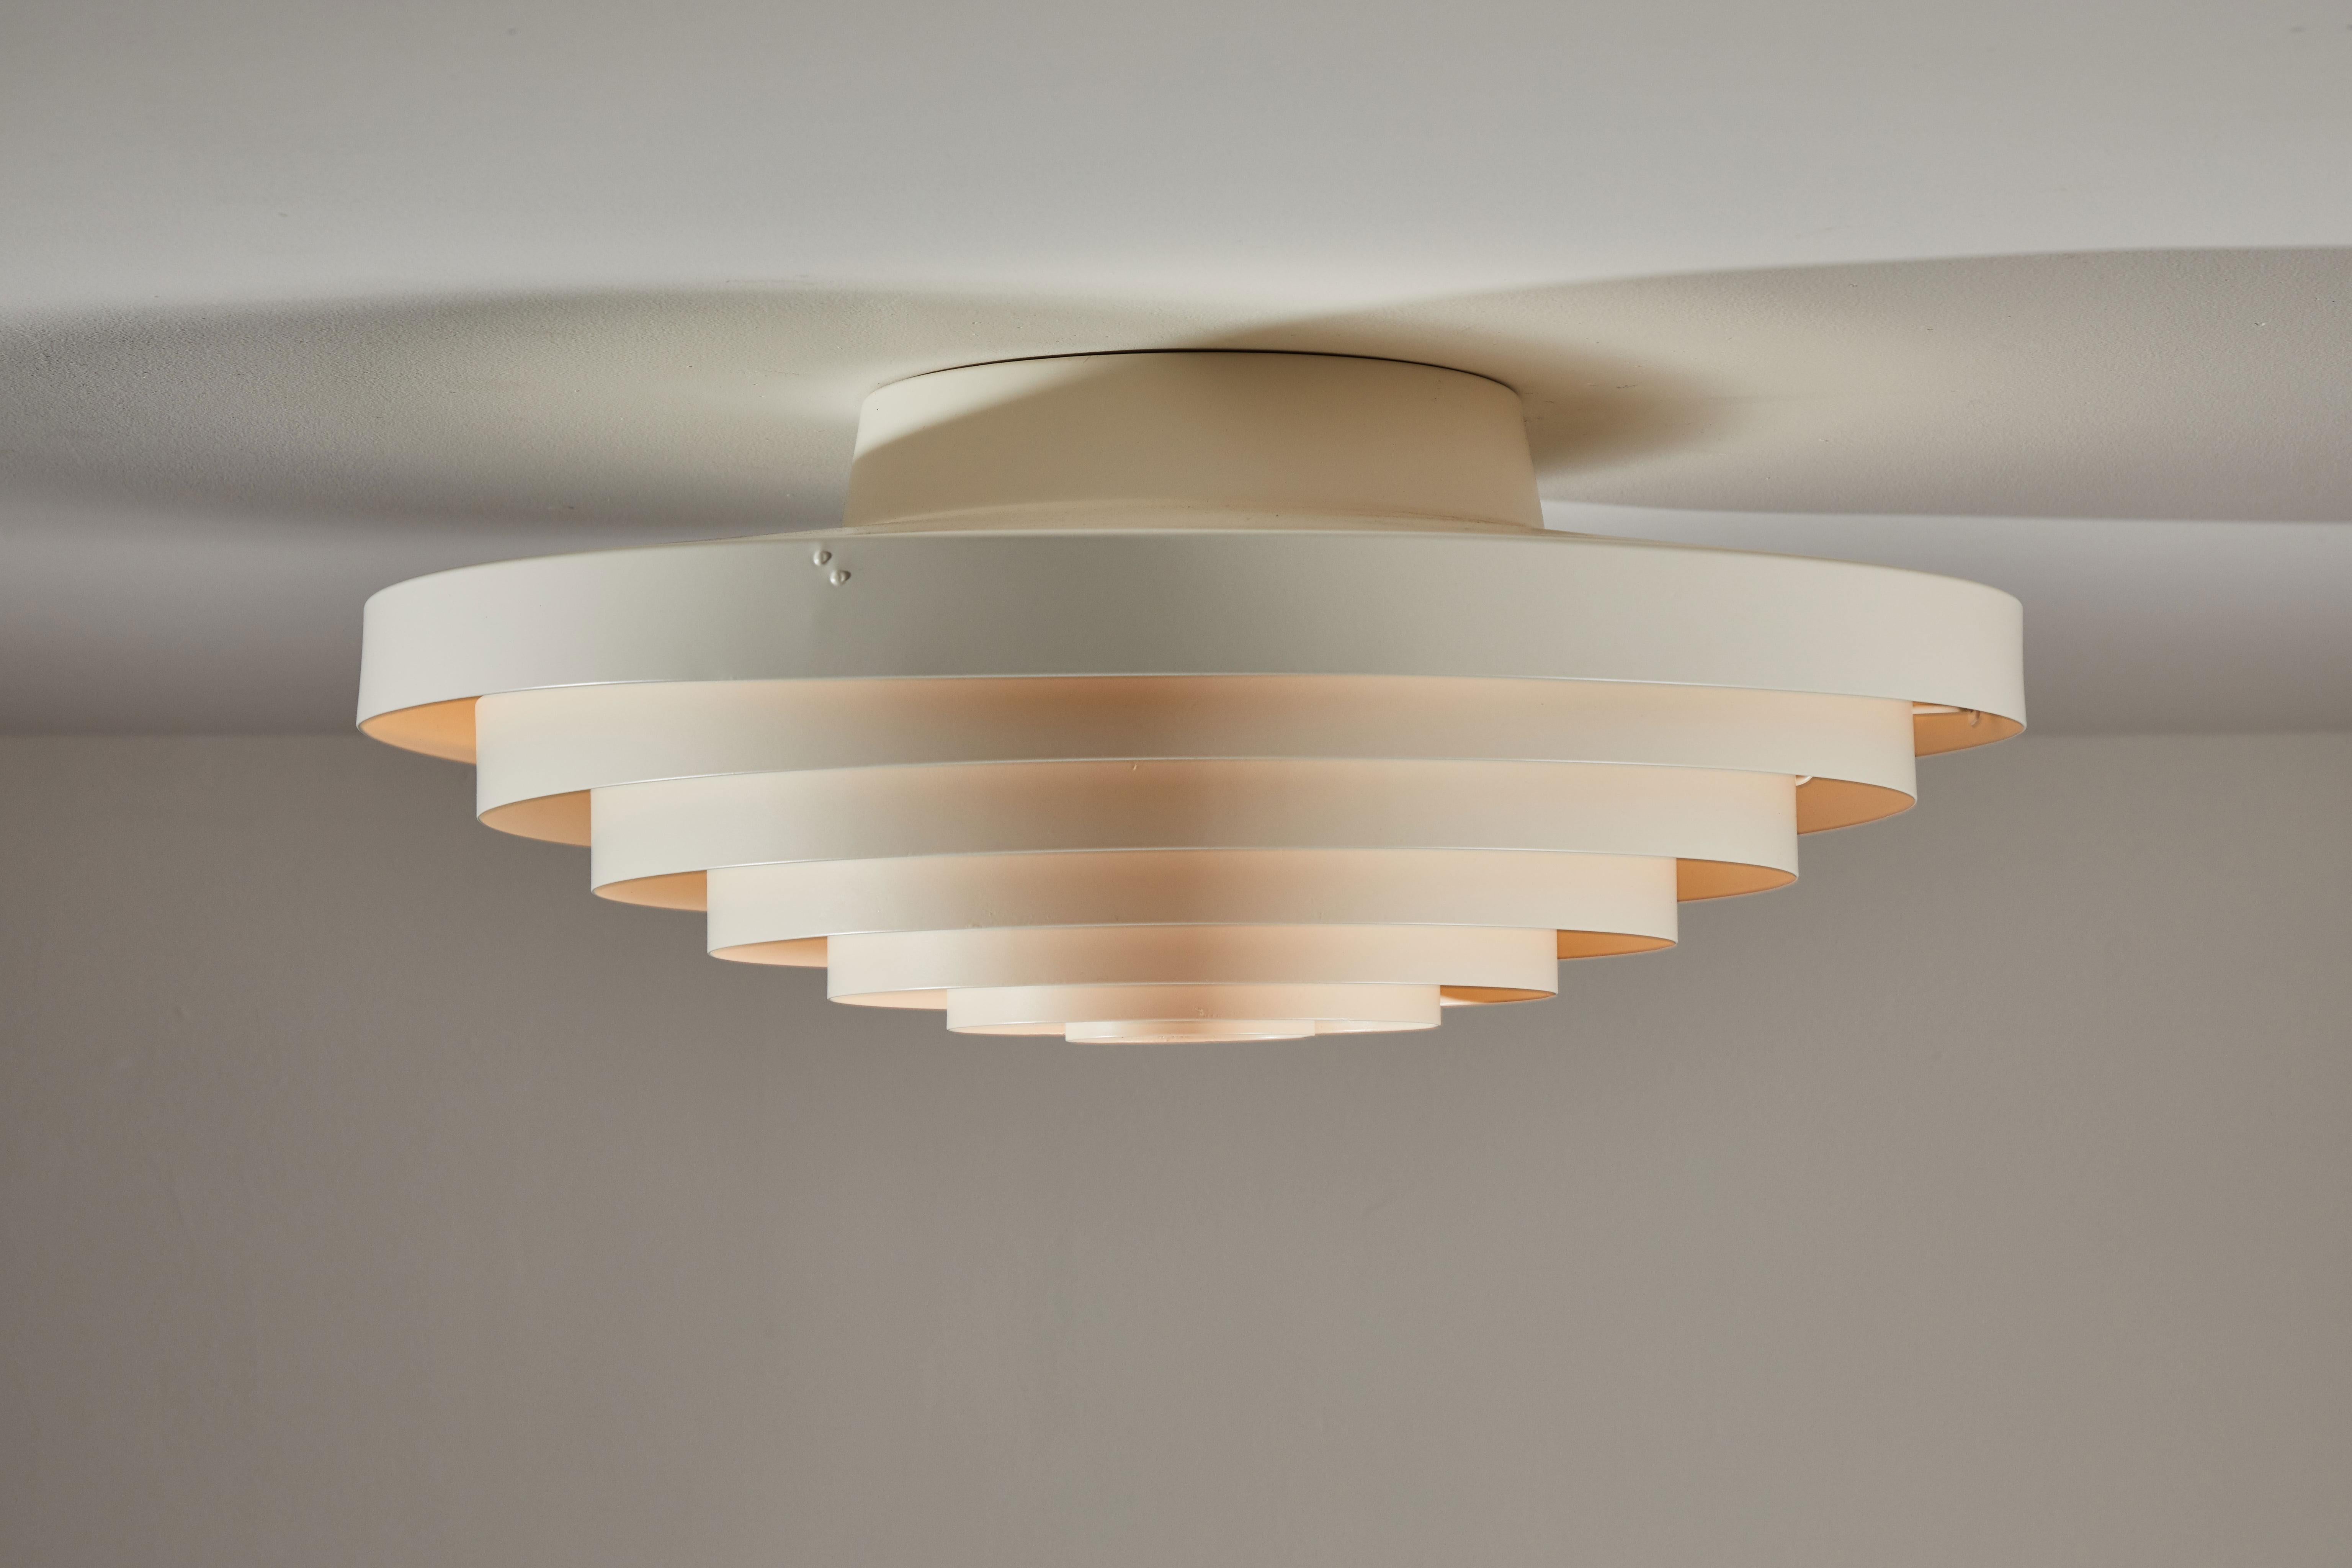 Aluminum Two Flush Mount Ceiling Lights by Lisa Johansson-Pape for Orno